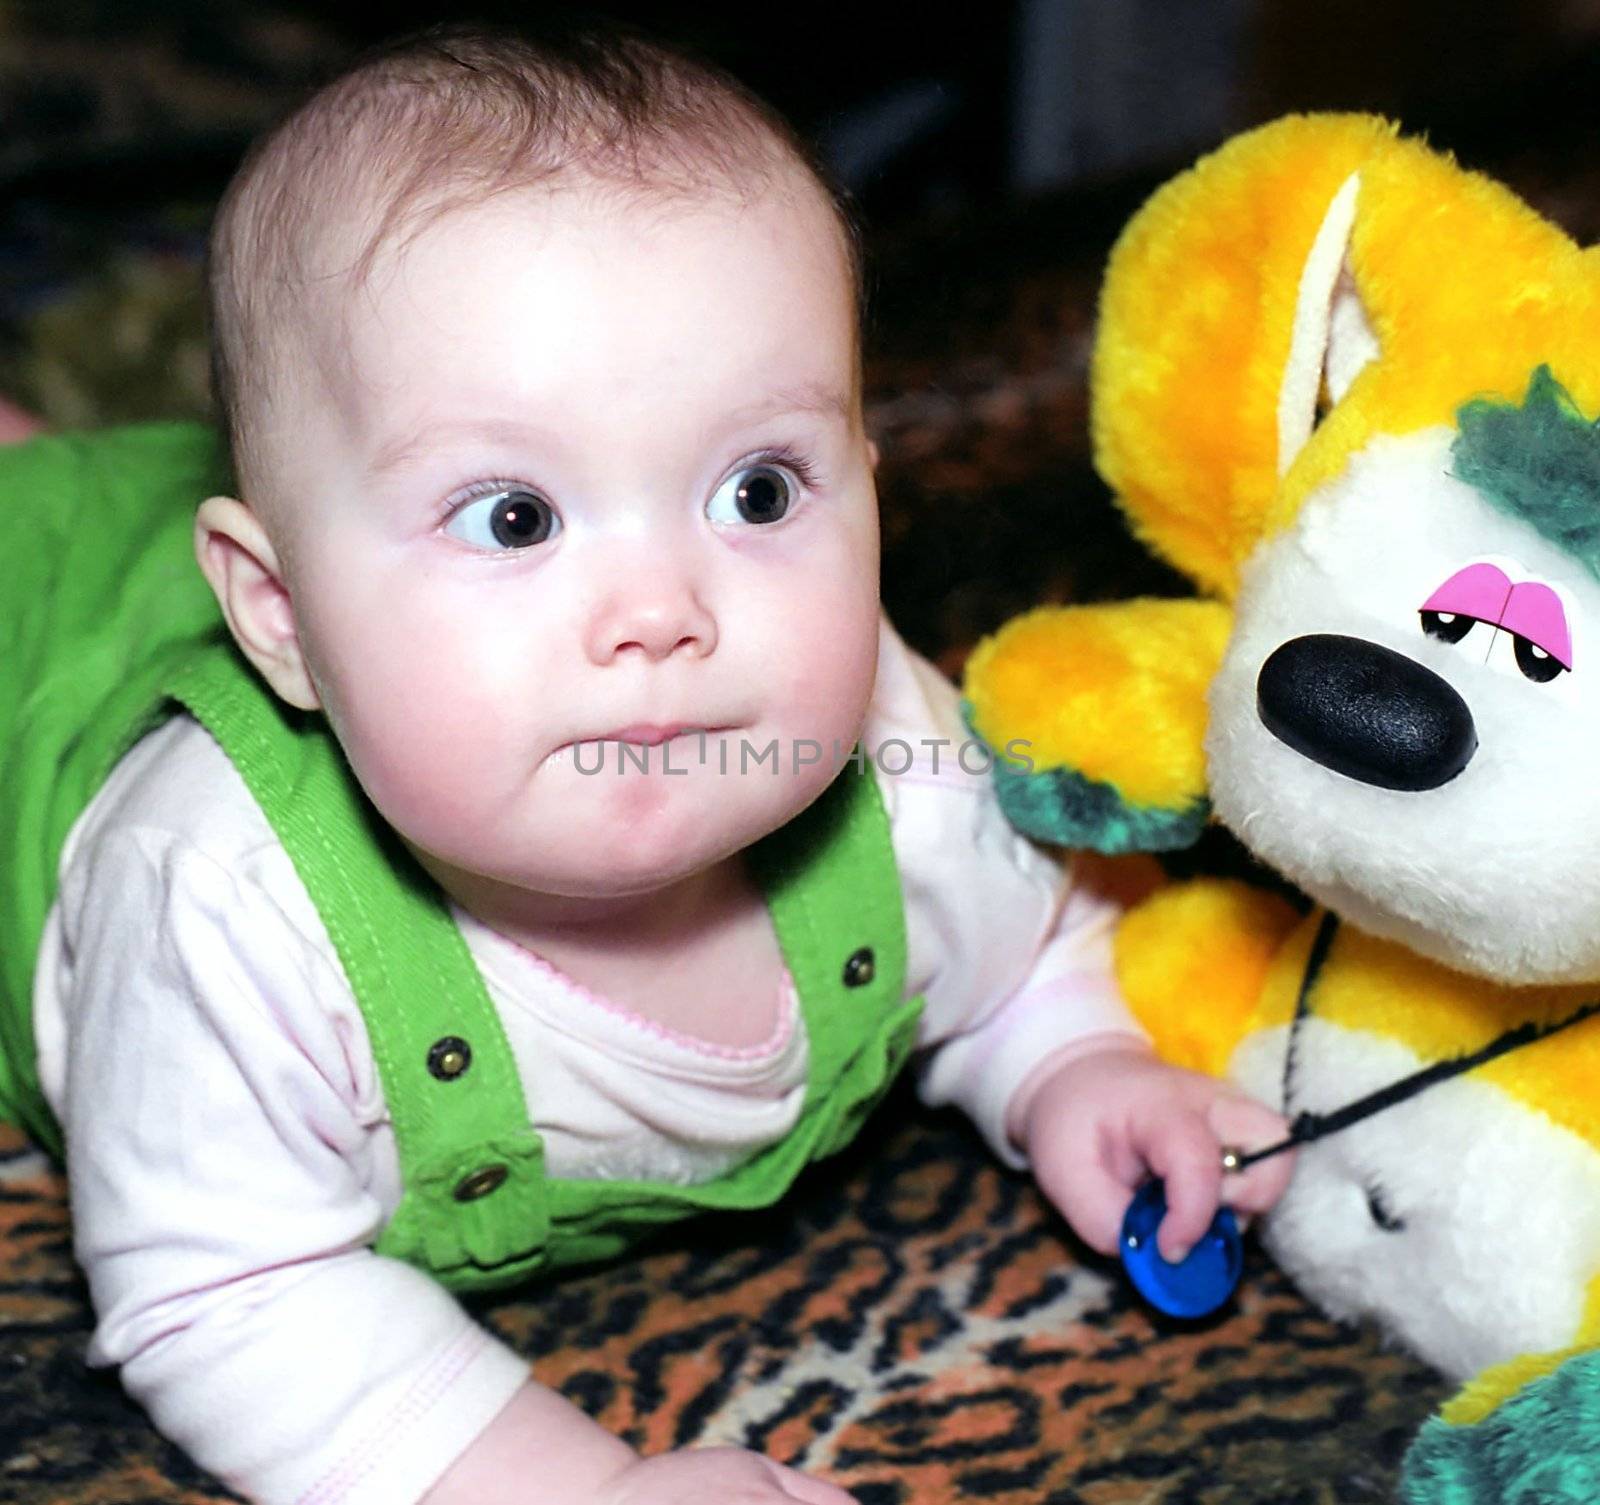 Pronating infant with yellow chinchilla toy looks at something